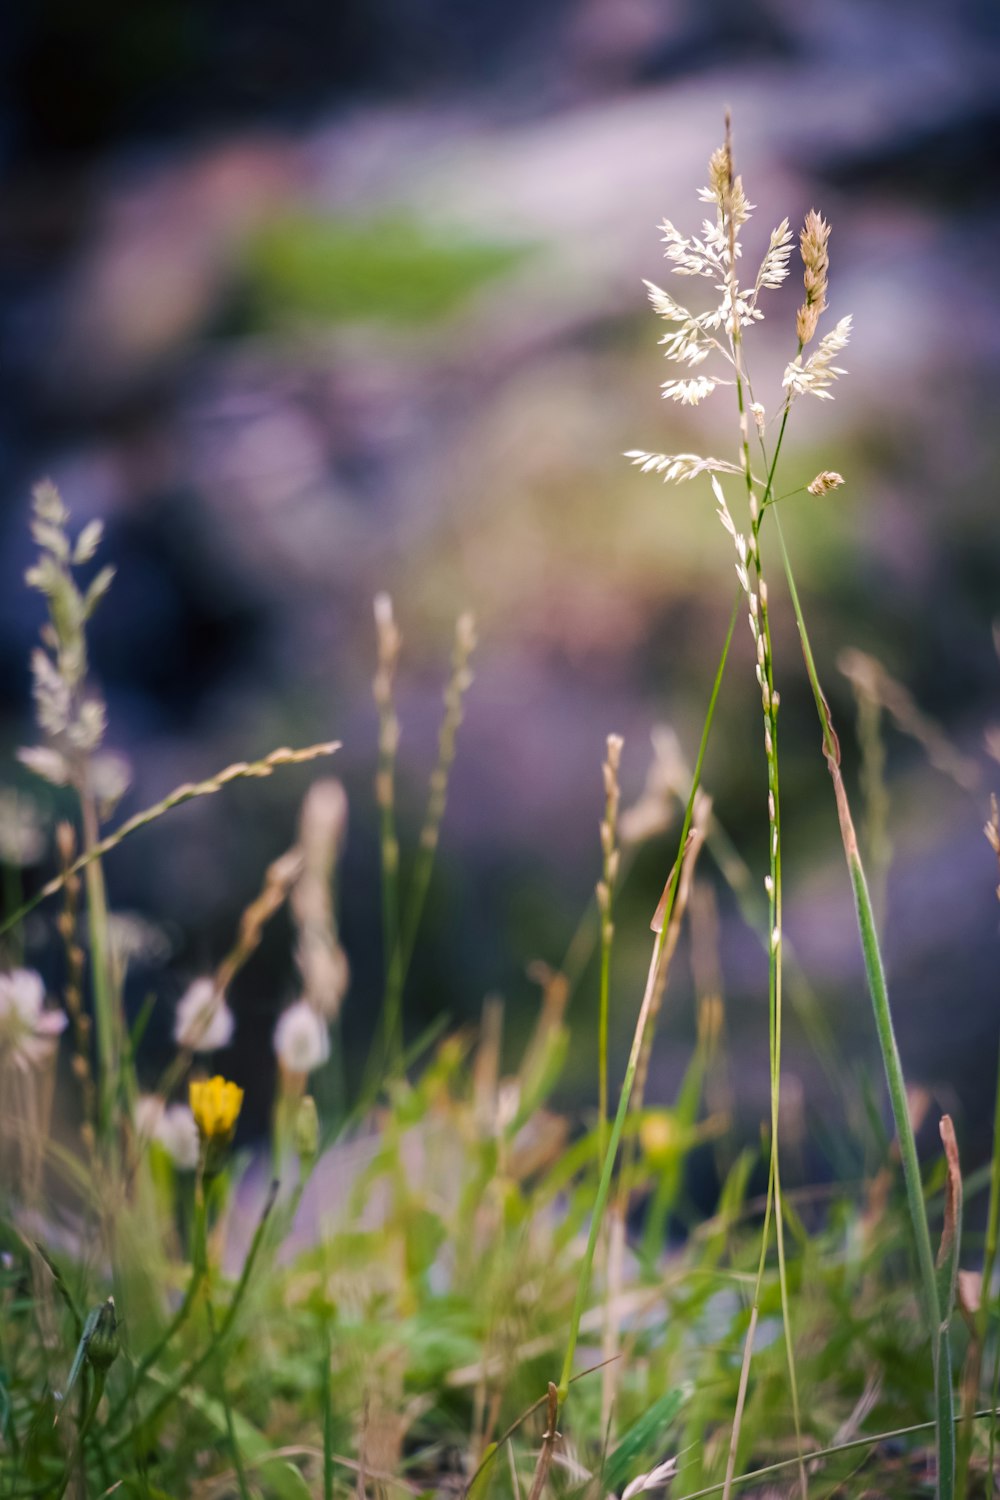 a close up of some grass and flowers